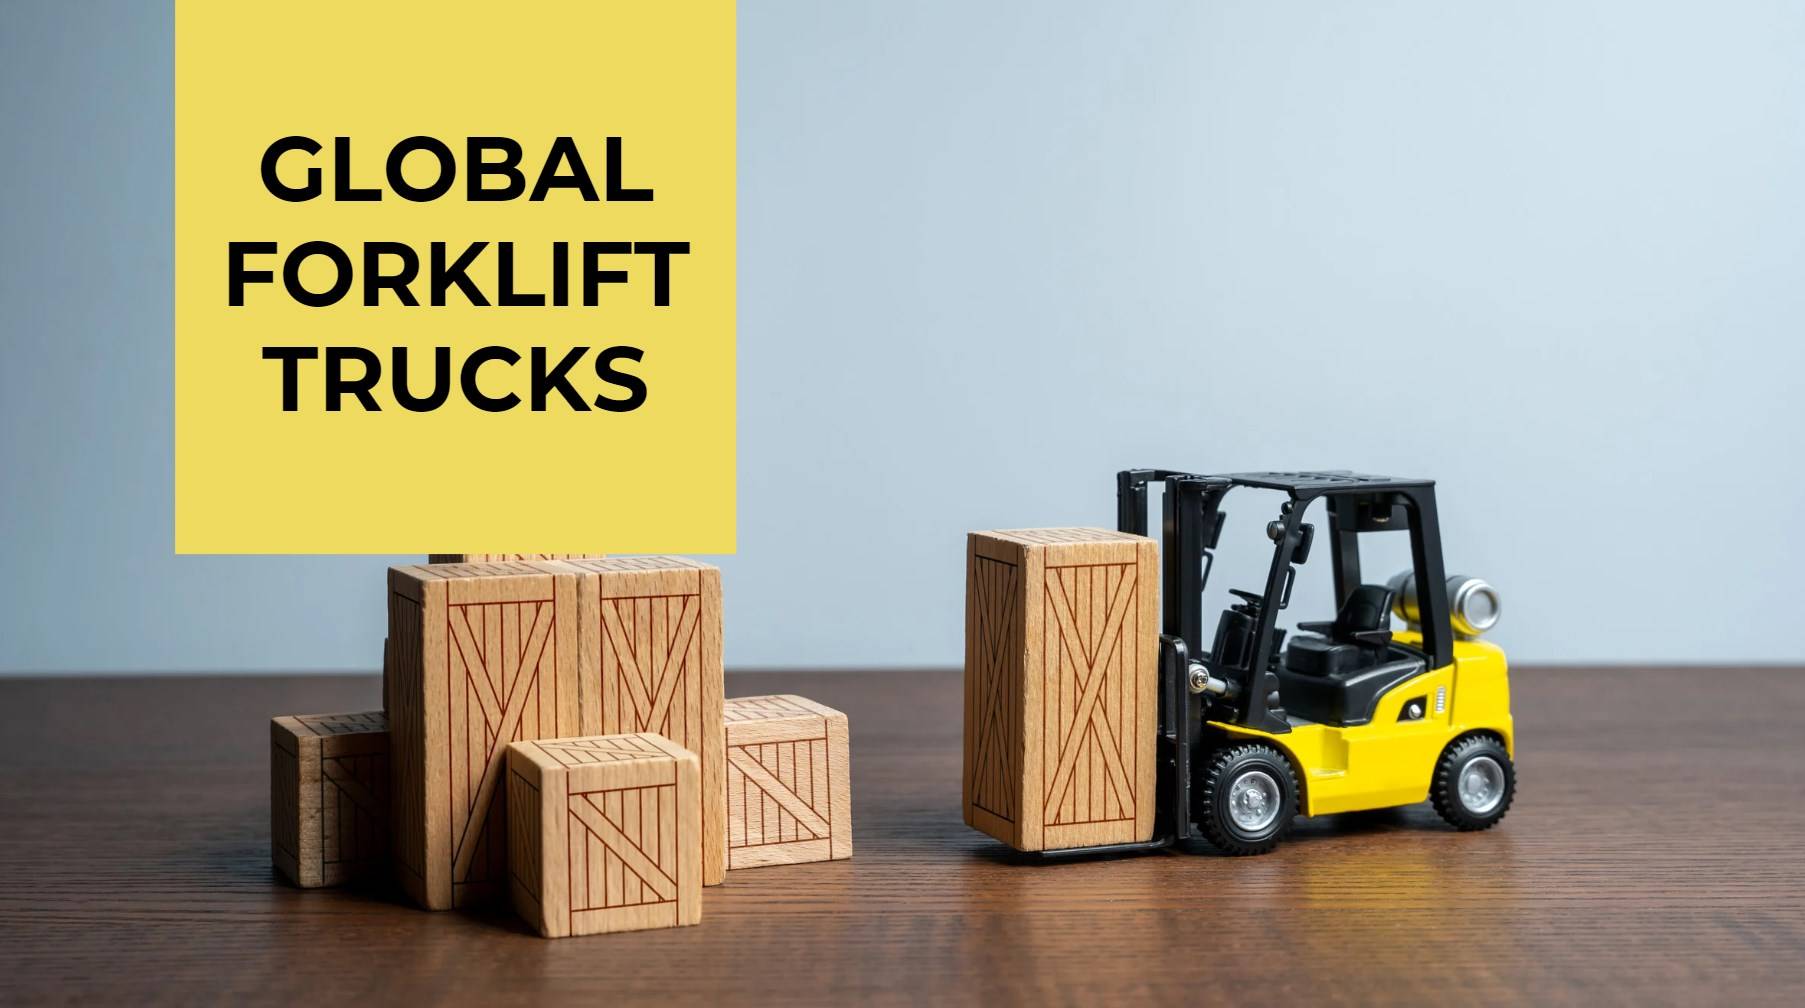 Global Forklift Trucks Market to Witness Steady Growth by 2027